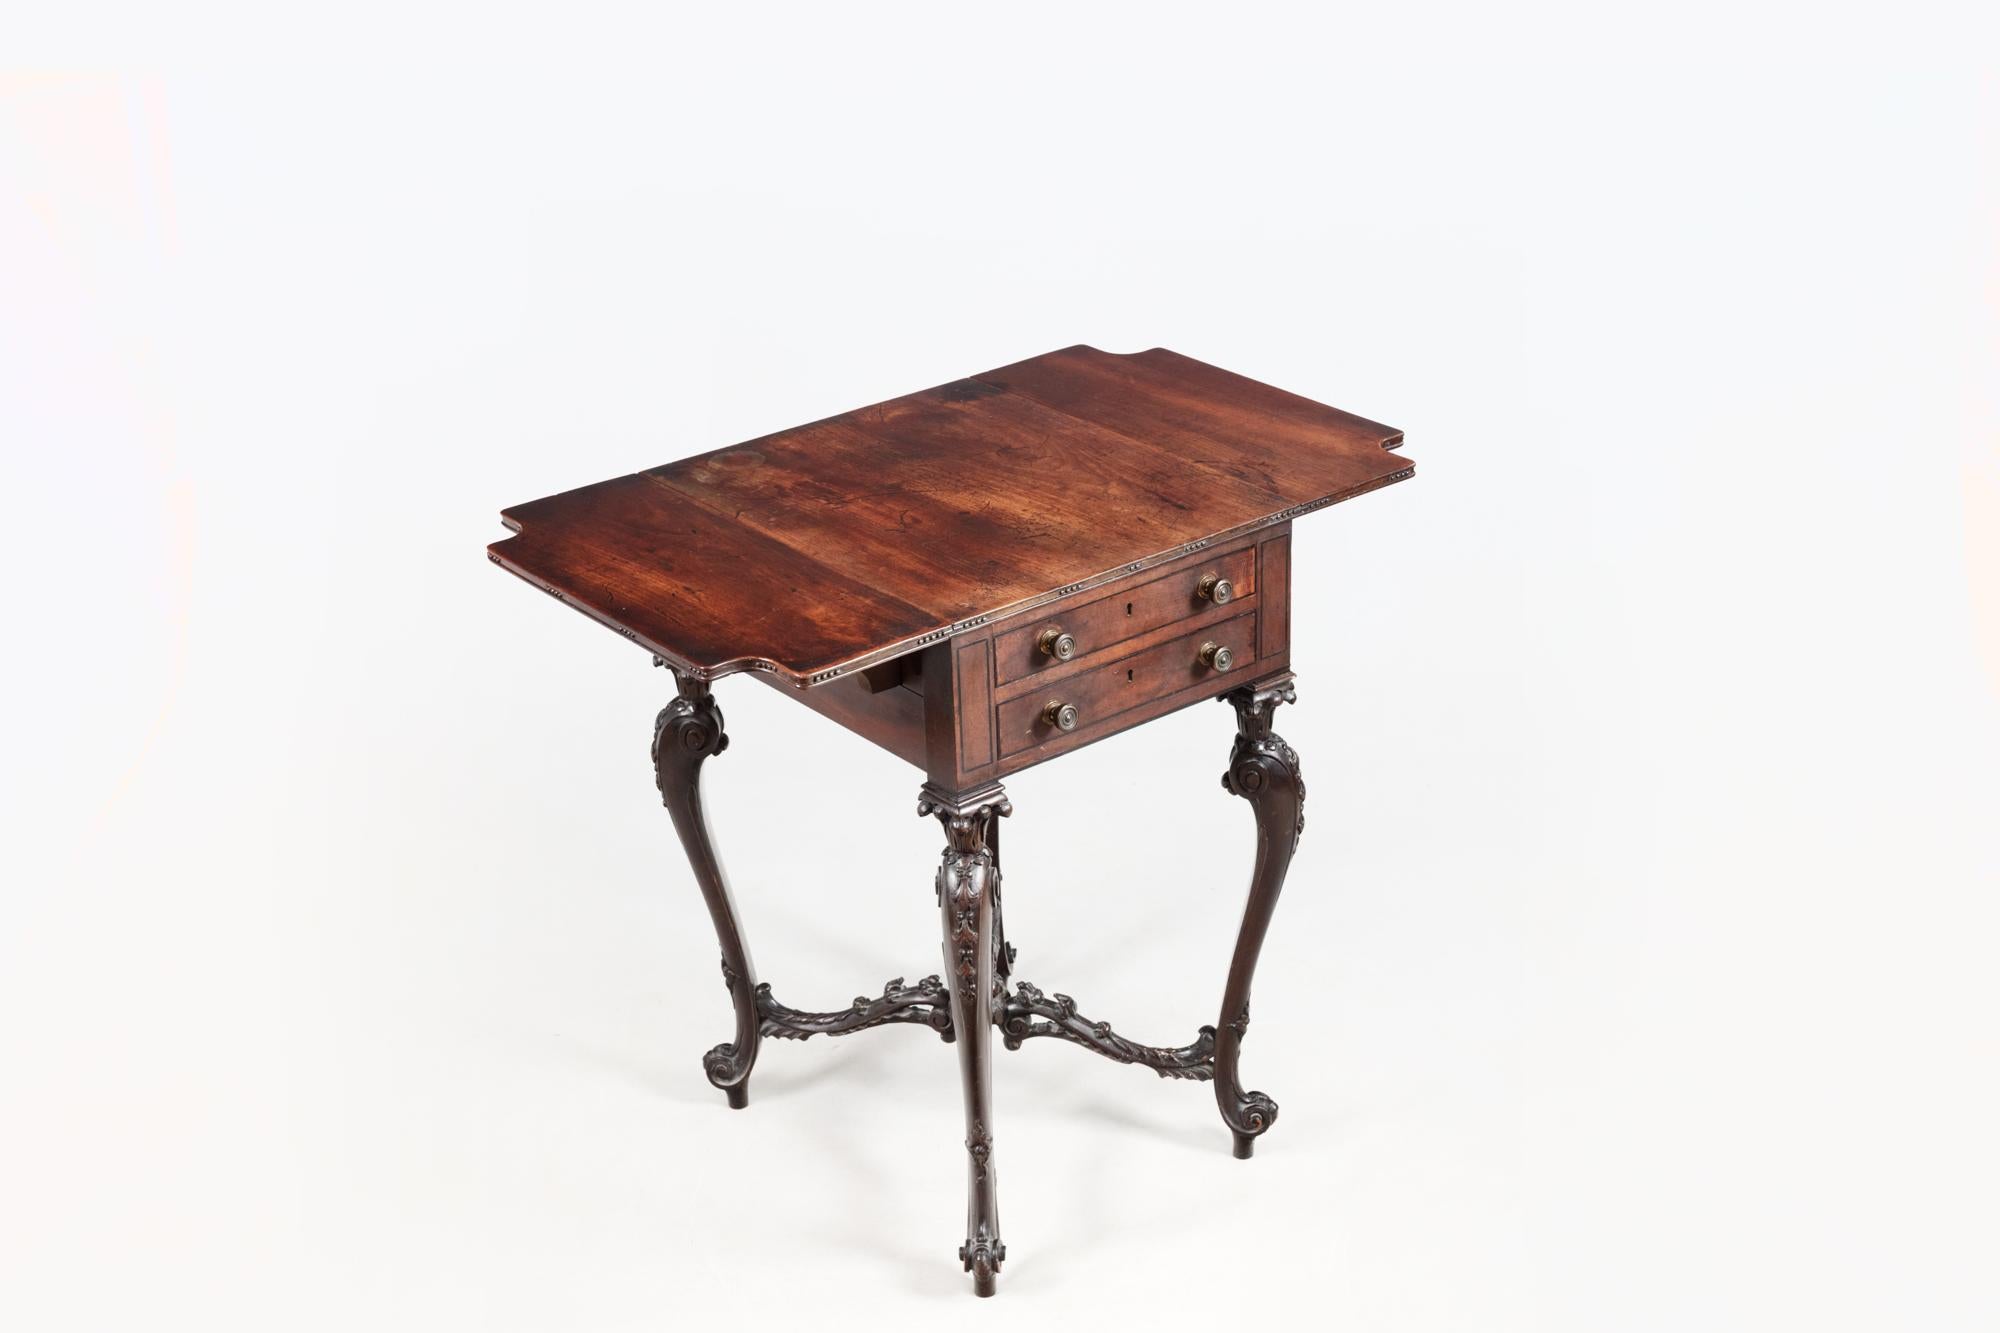 Irish 19th Century Mahogany Pembroke Table With Chippendale-Style Legs For Sale